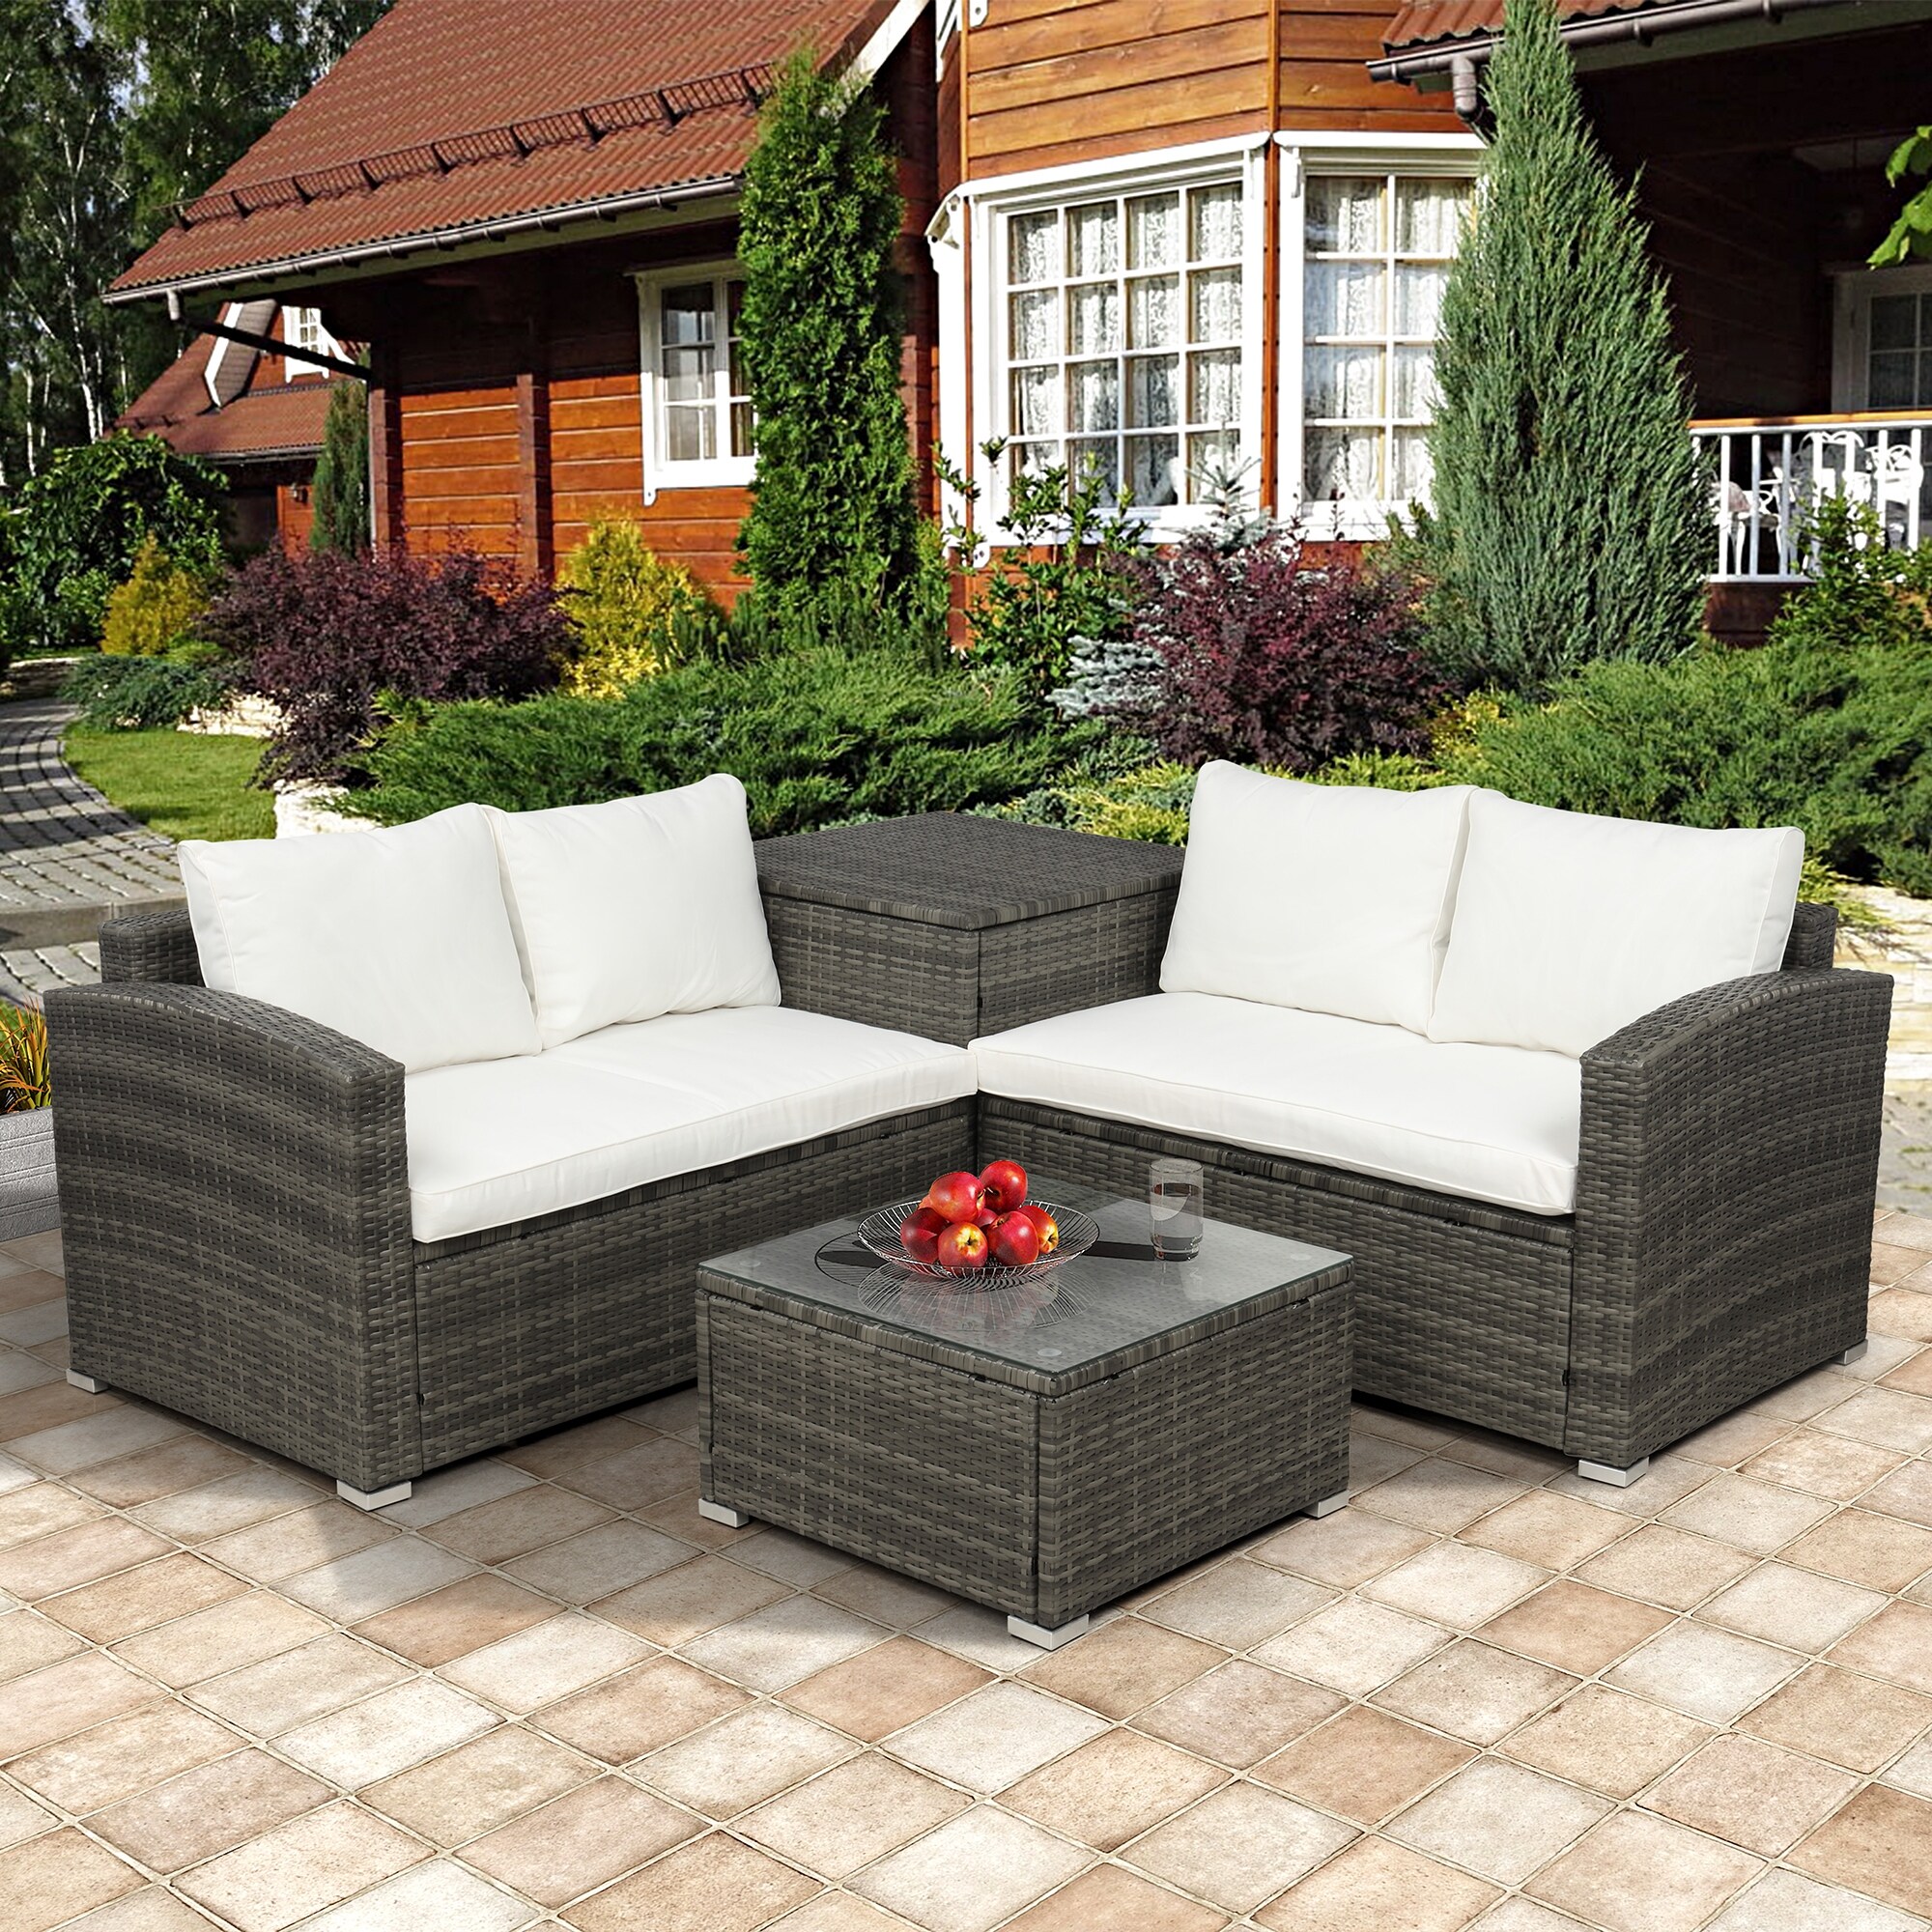 4-piece Outdoor Cushioned Pe Rattan Wicker Sectional Sofa Set